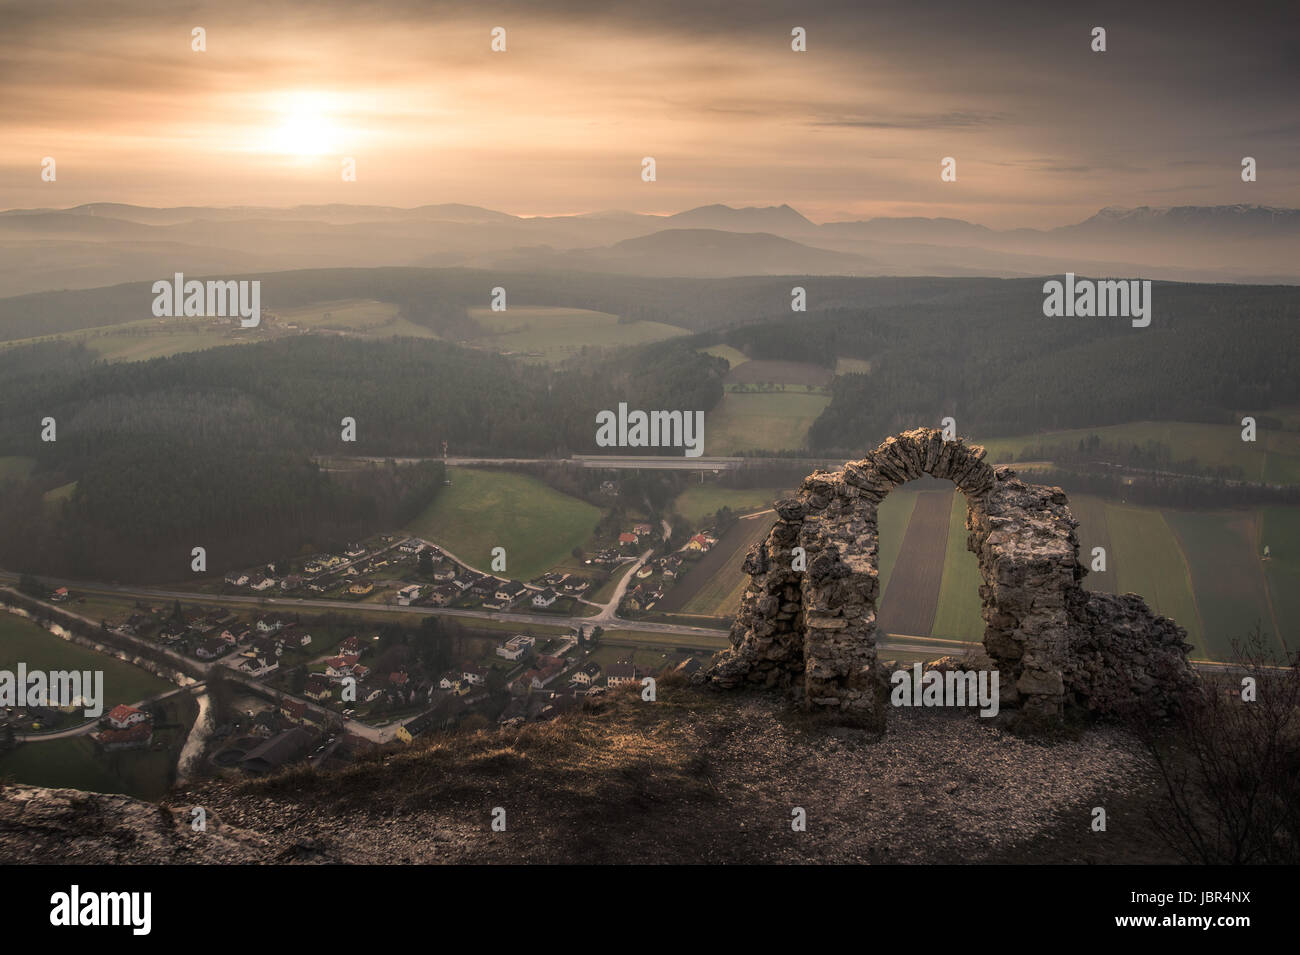 Ancient Ruins on a Rockface in Gleissenfeld, Austria with Mountains and Village in Background. Located in Nature Park Seebenstein-Turkensturz. Stock Photo